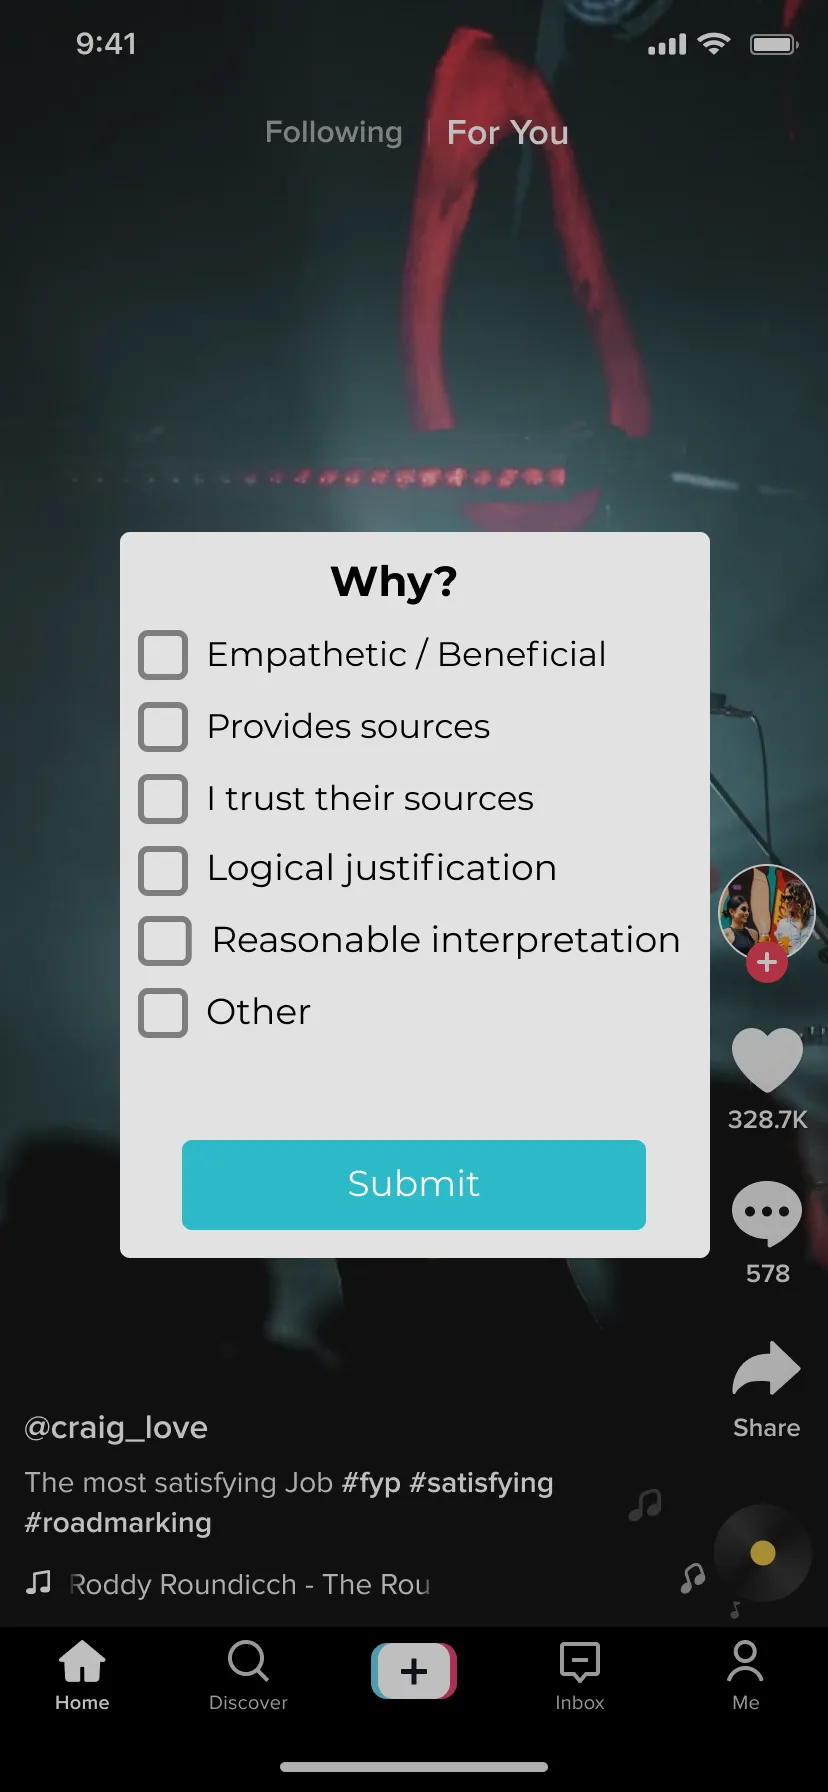 A image of TikTok with a popup showing a list of reasons to trust a tiktok